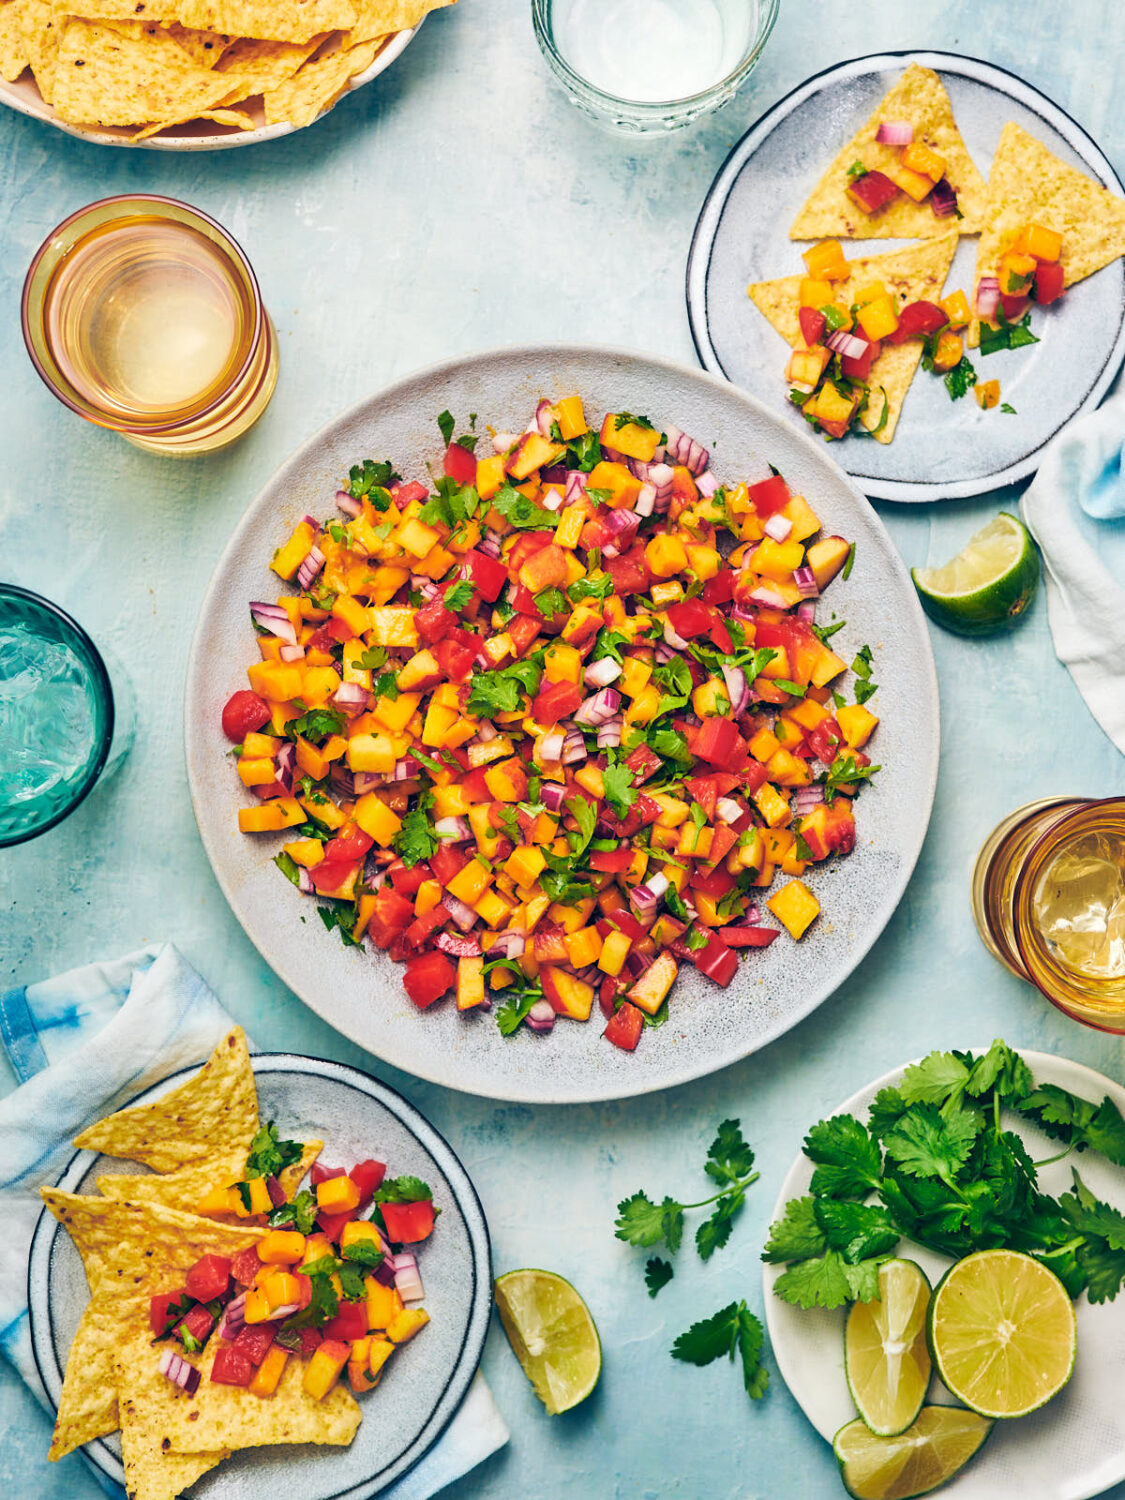 Peach Mango Salsa being served with tortilla chips, fresh limes, cilantro, and drinks.